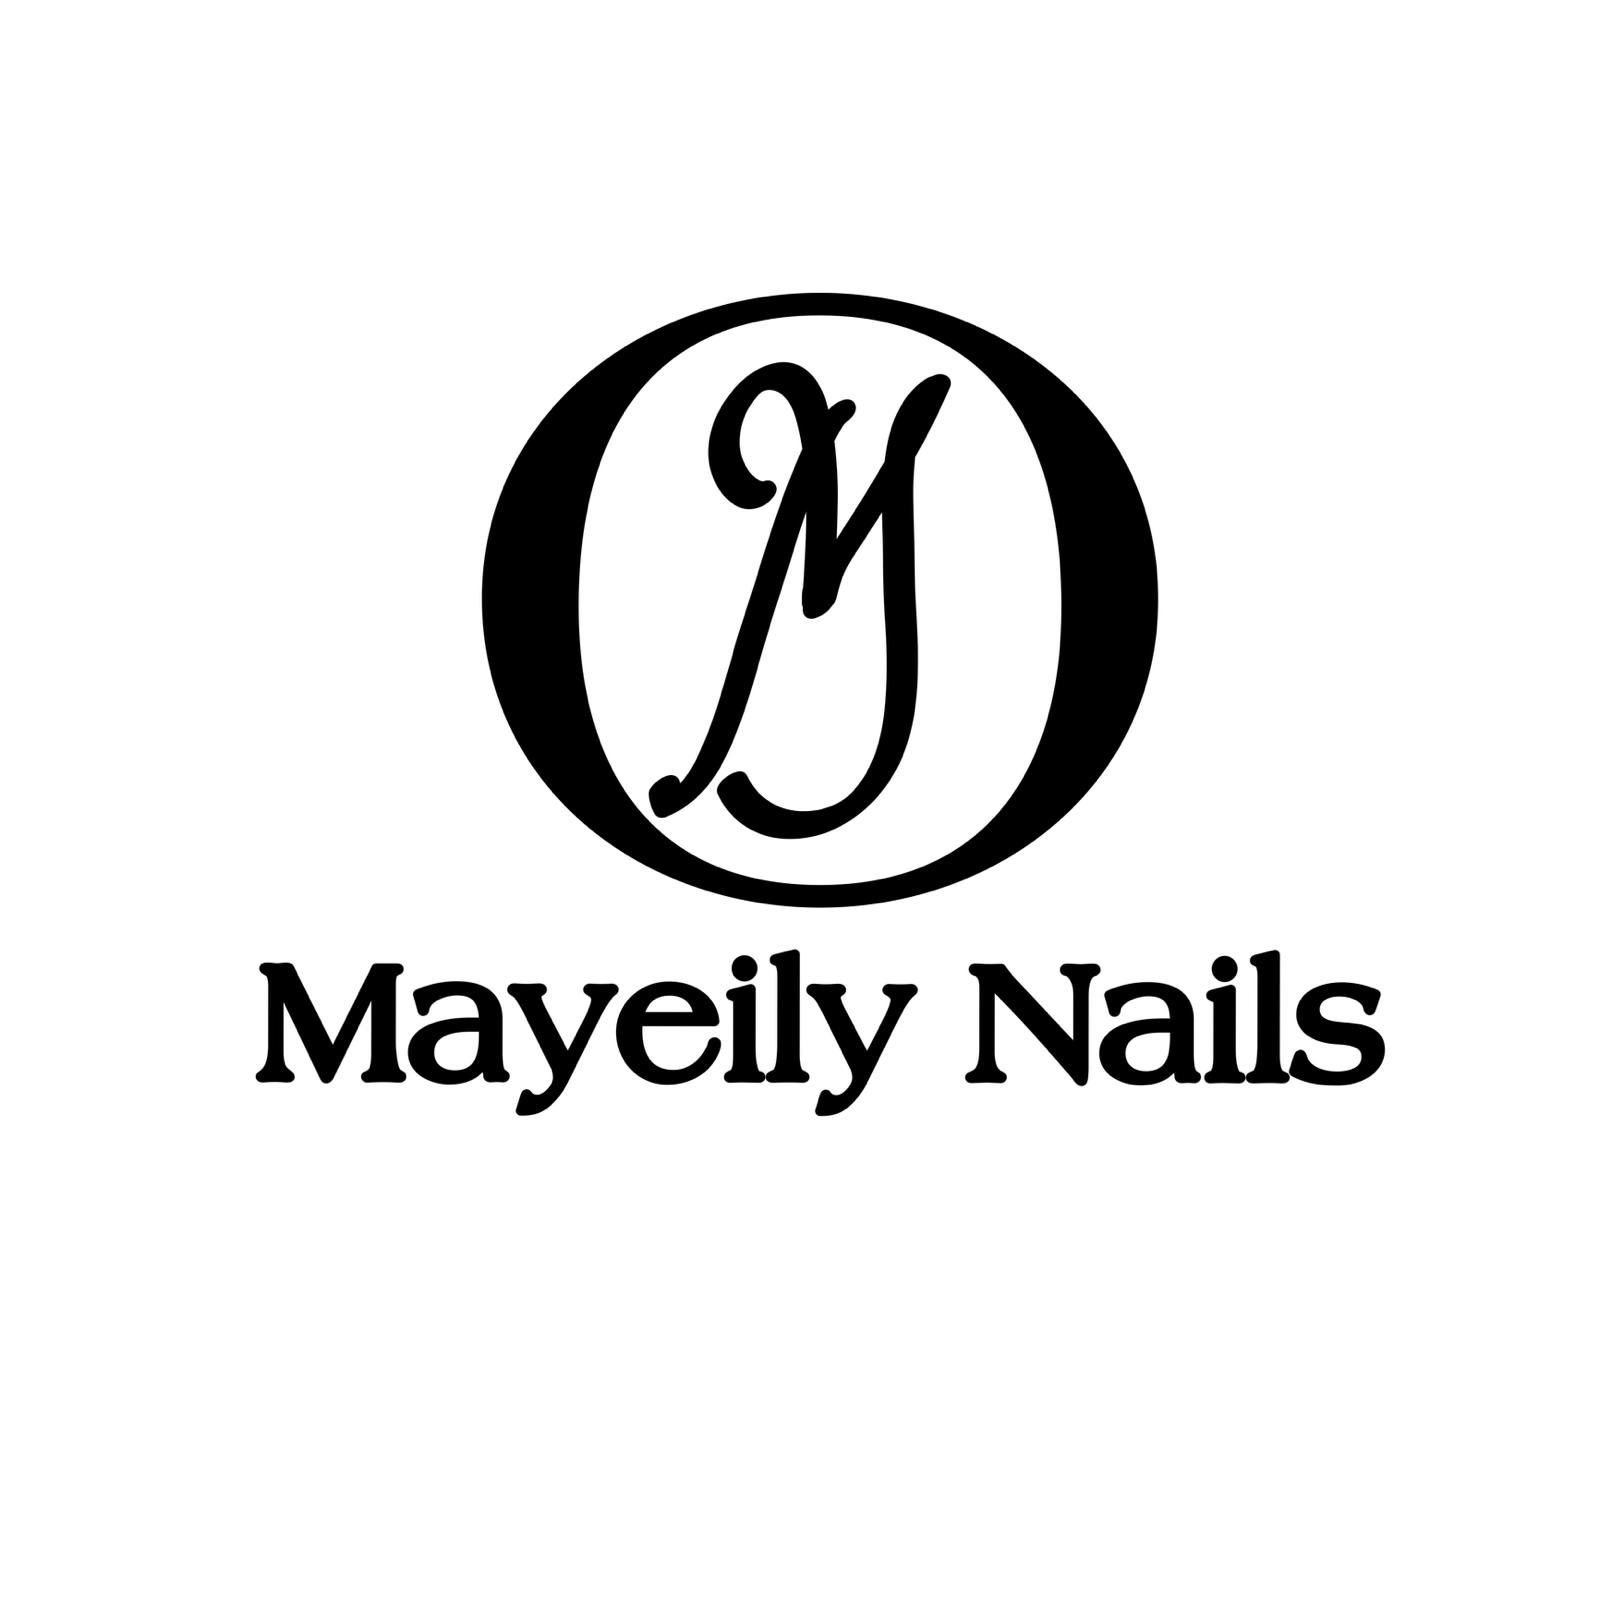 Mayeily Nails Figueres